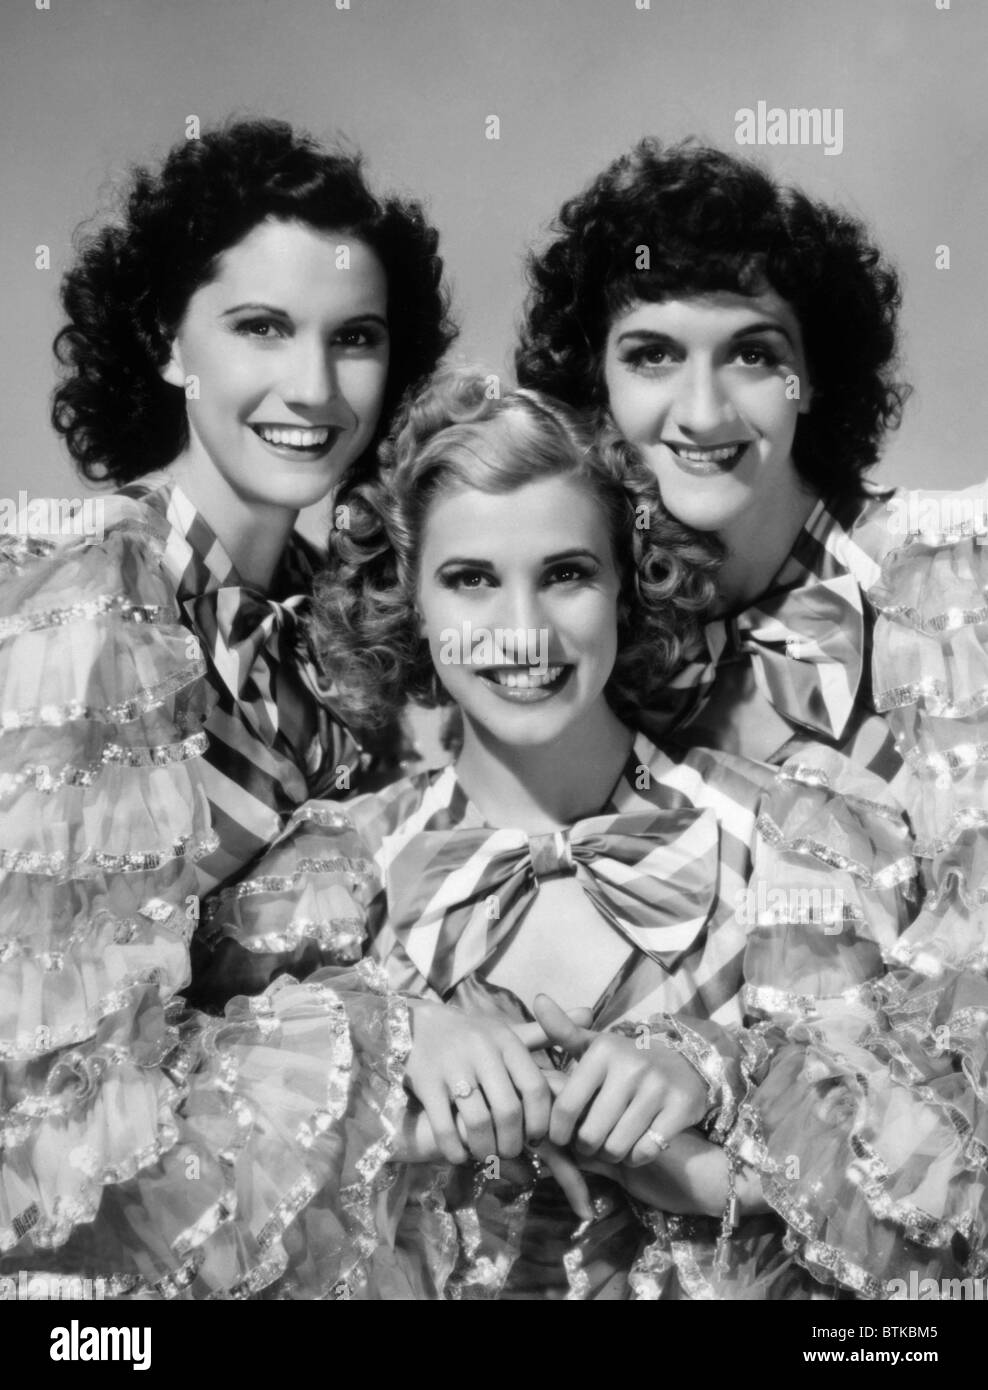 ARGENTINE NIGHTS, The Andrews Sisters, Maxene Andrews, Patty Andrews, LaVerne Andrews, 1940 Stock Photo